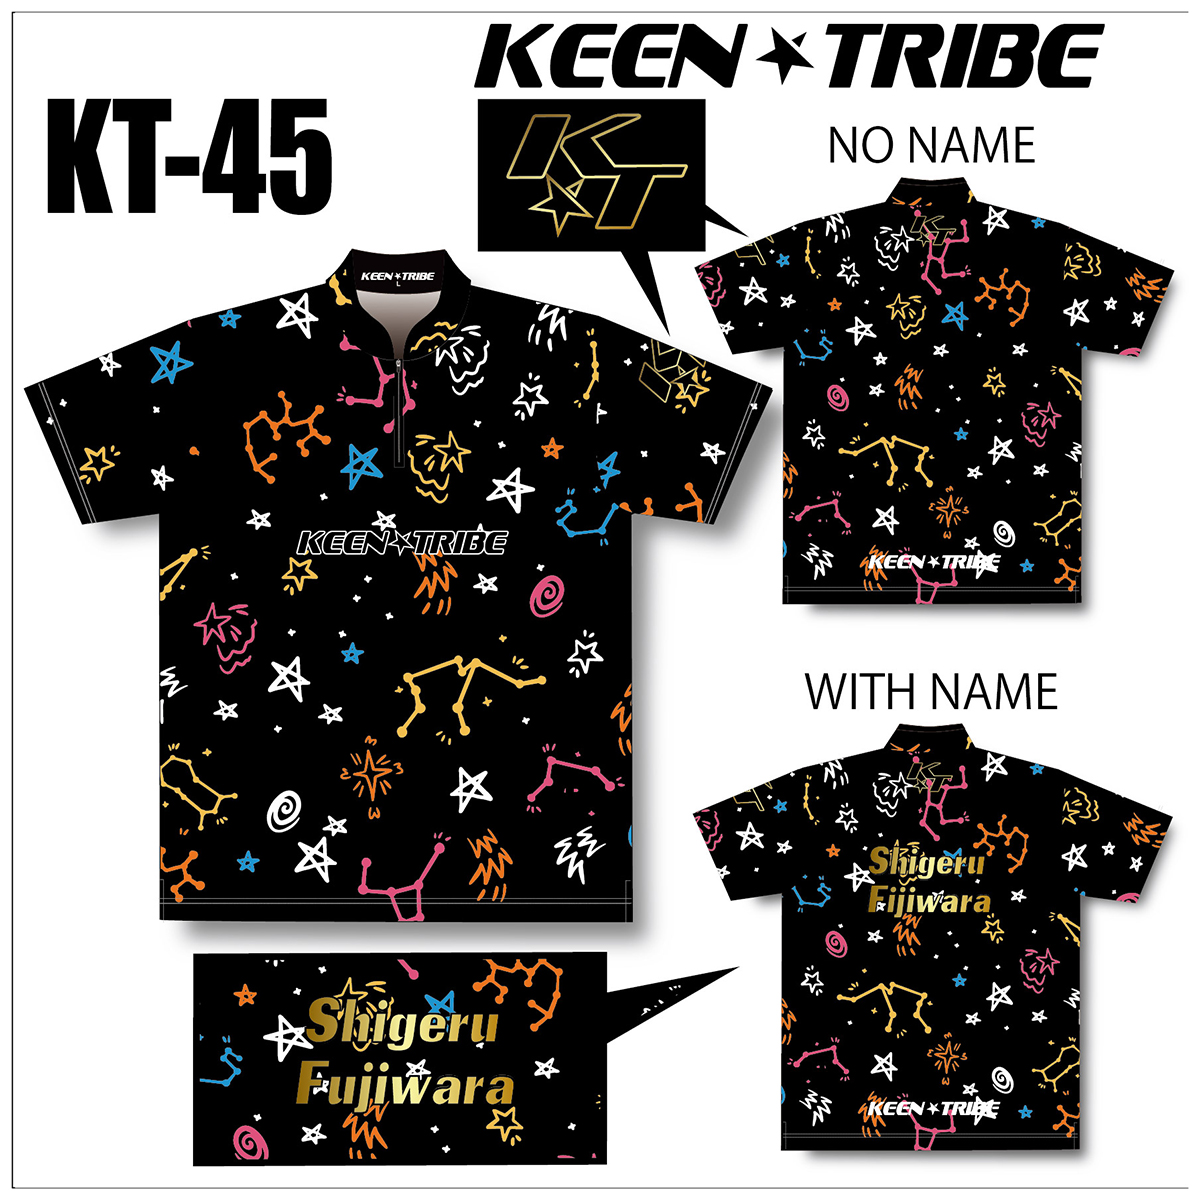 KEEN ★ TRIBE　KT-45(受注生産)